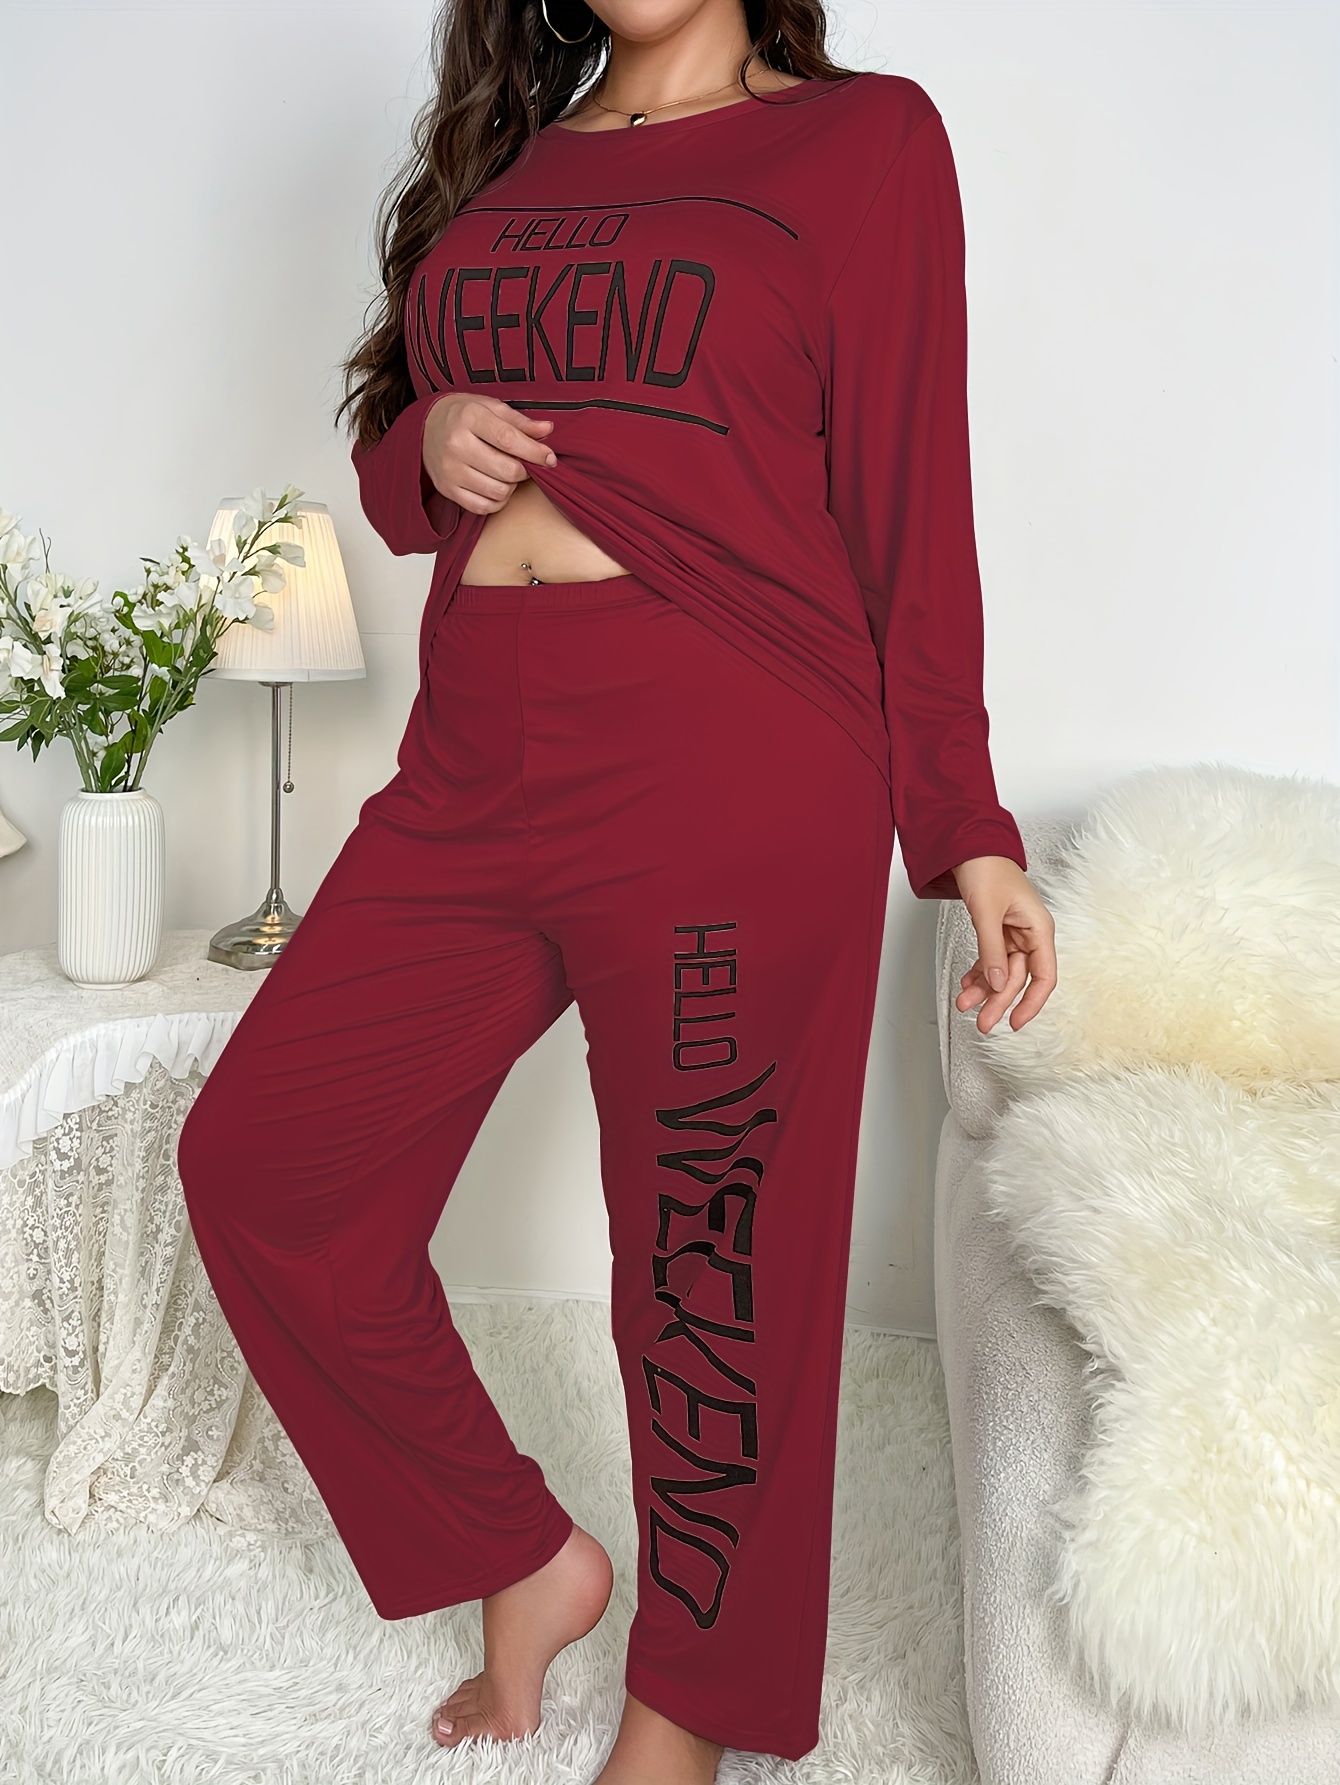 Women's Fuzzy 2 Piece Outfits Casual Pajama Sets Long Sleeve Fleece Crop  Top and Pants Set Loungewear Sleepwear Ladies Clothes